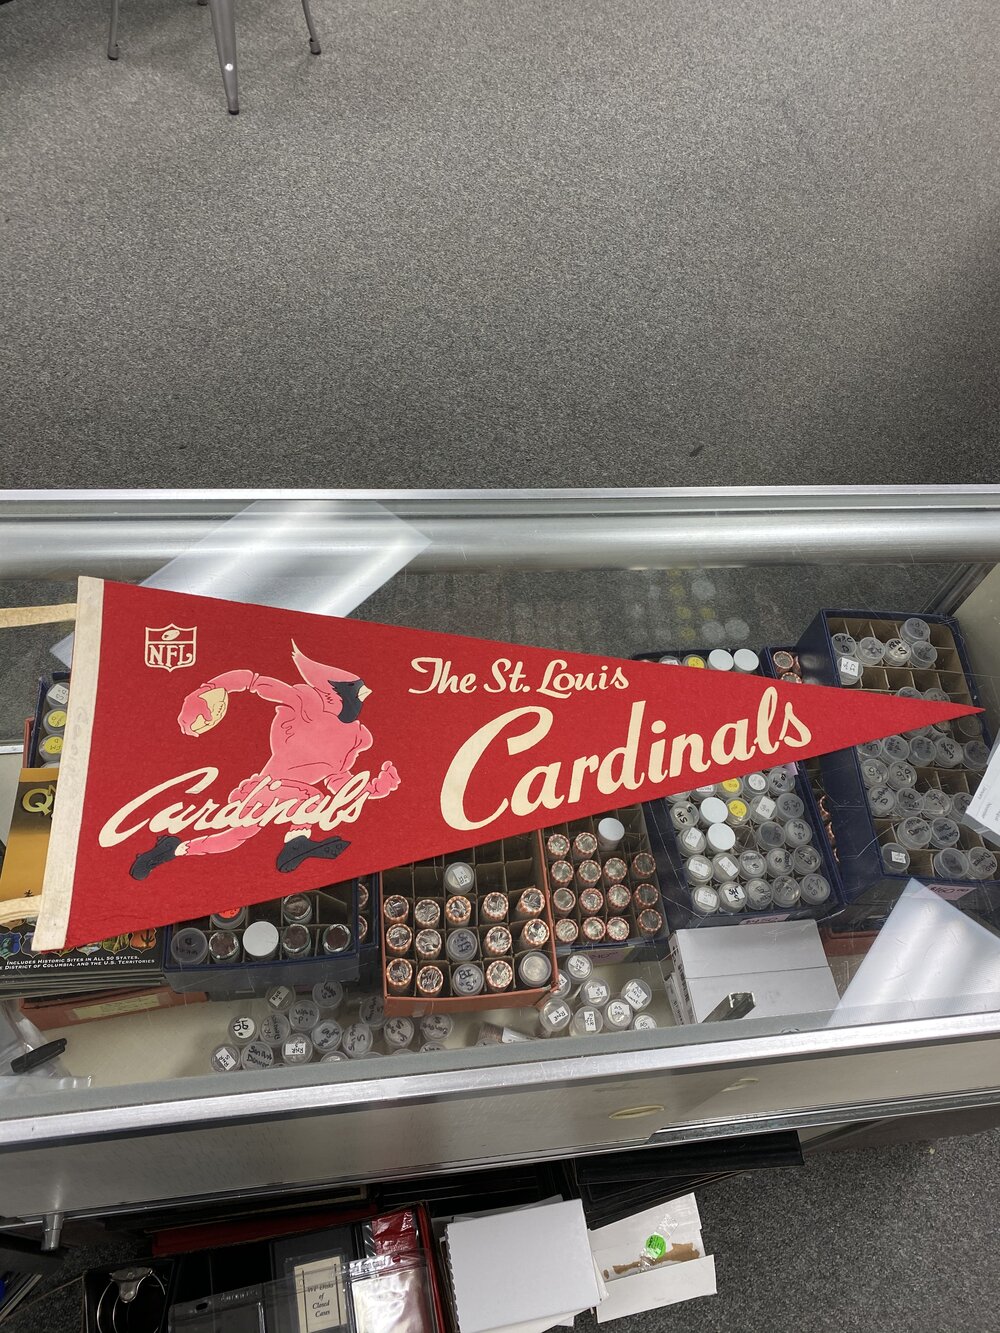 Vintage St. Louis Cardinals Pennant — First State Coins